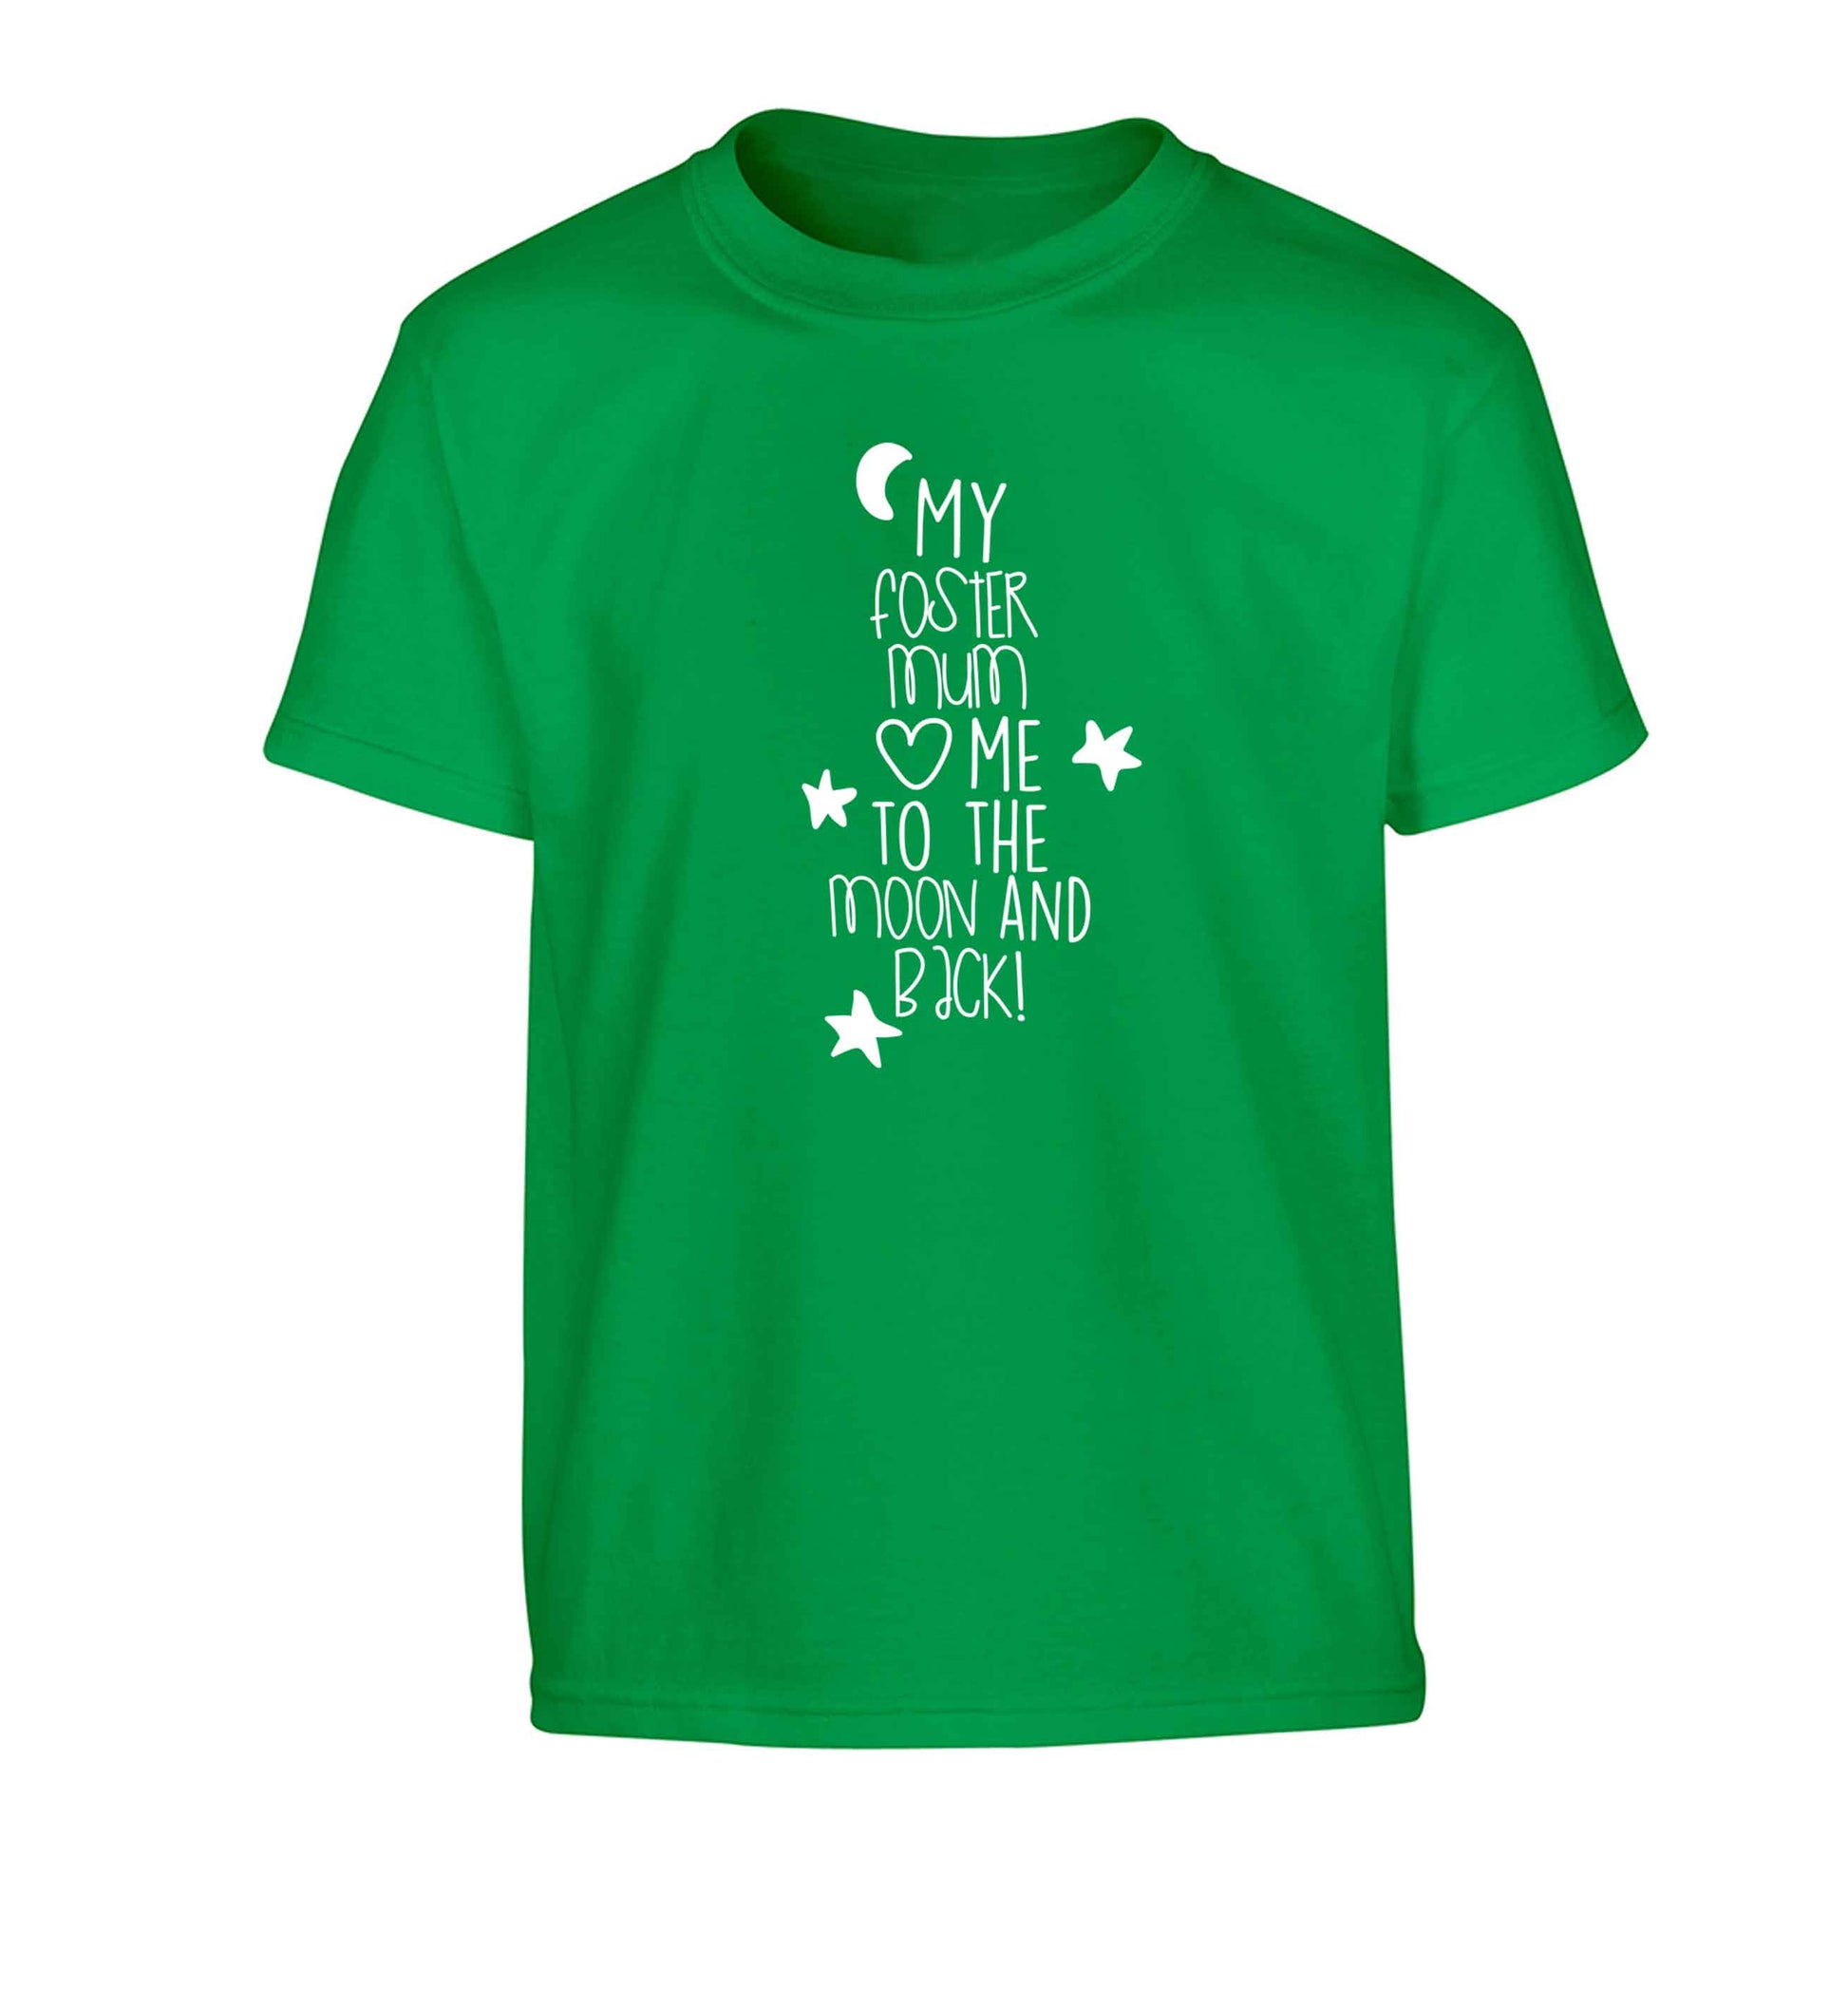 My foster mum loves me to the moon and back Children's green Tshirt 12-13 Years